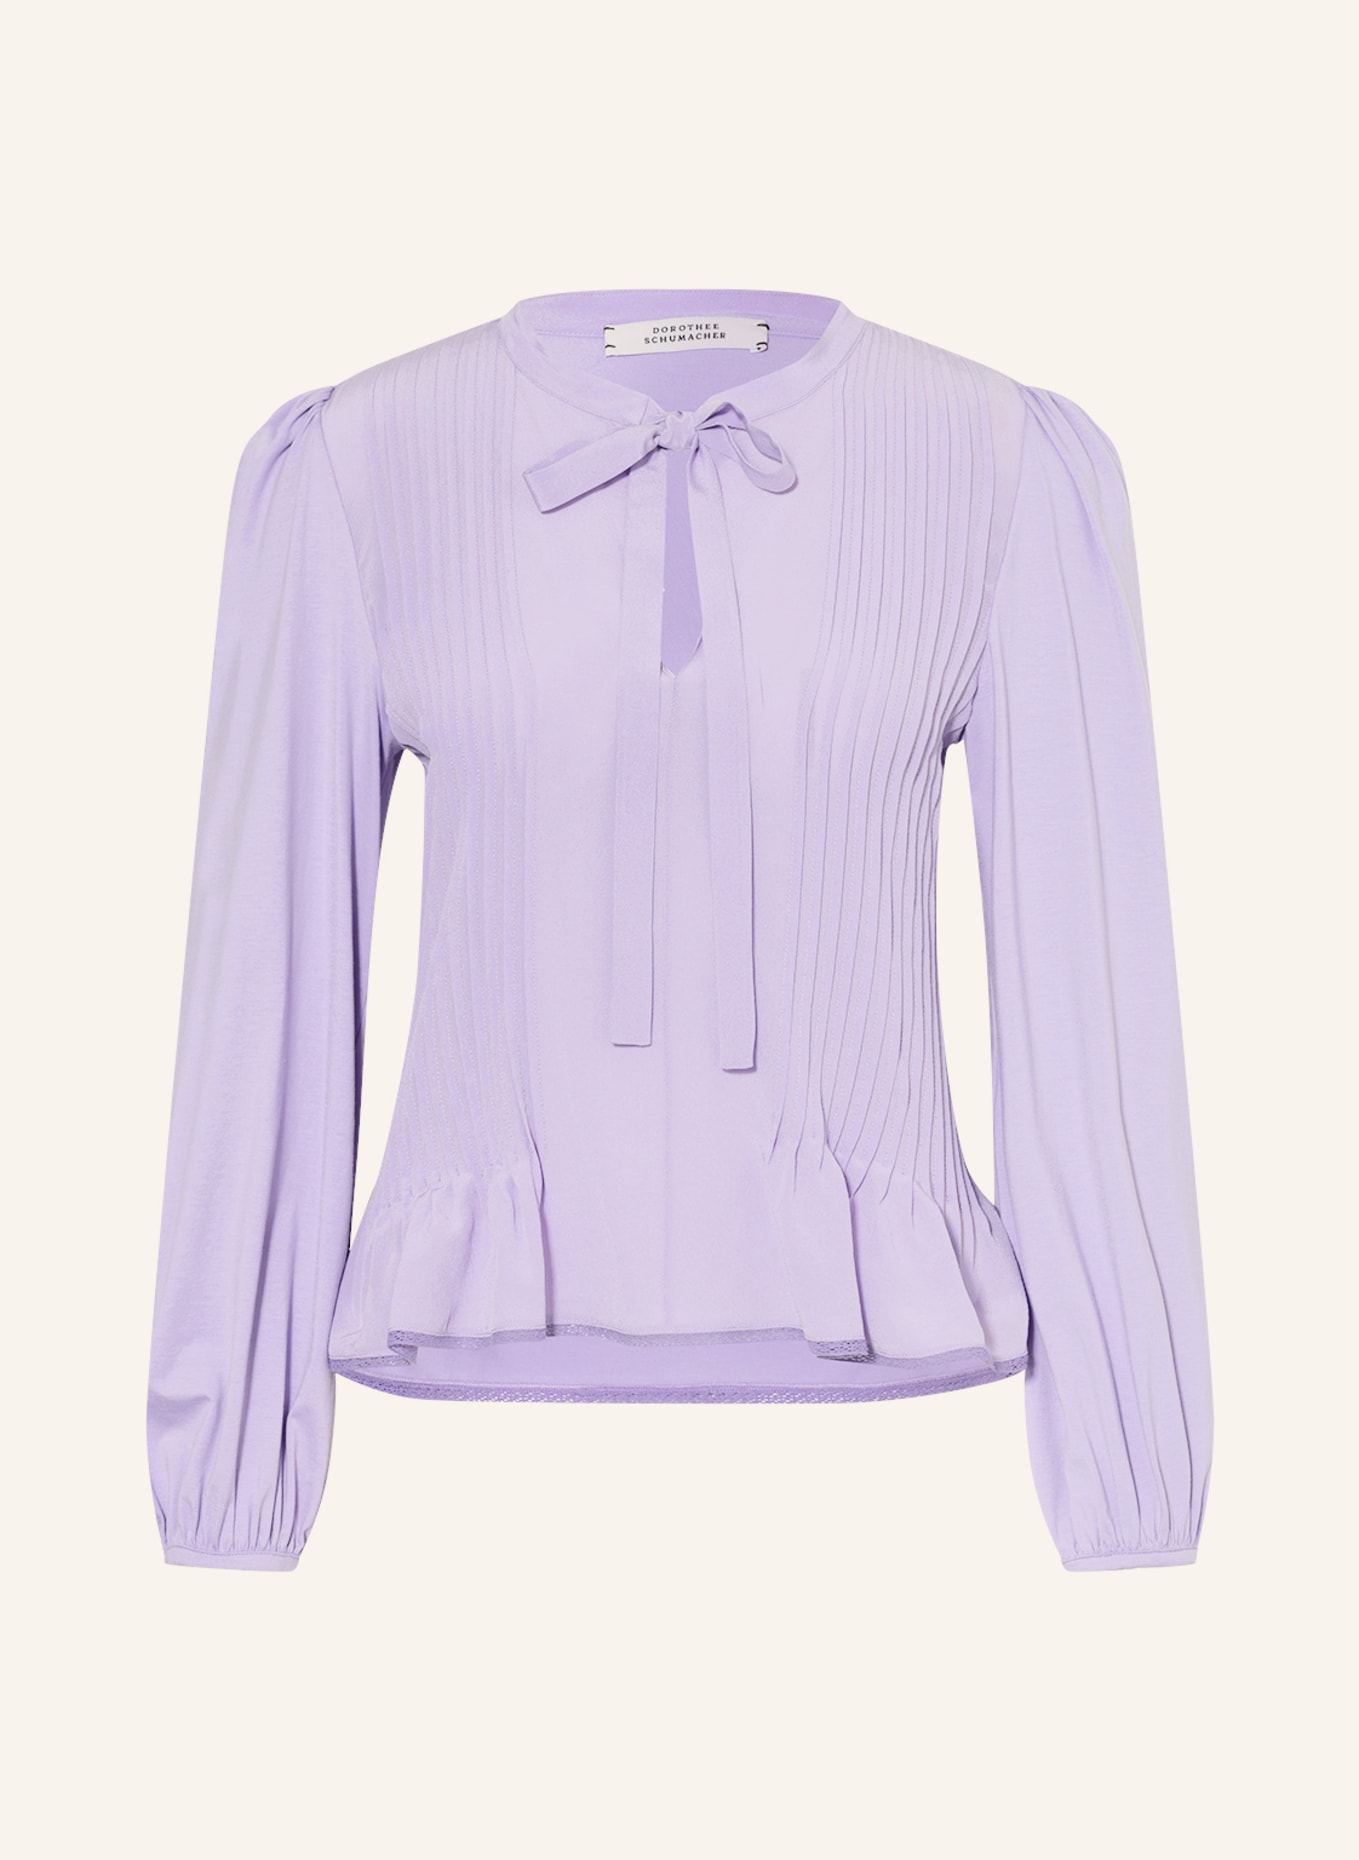 DOROTHEE SCHUMACHER Blouse in mixed materials , Color: LIGHT PURPLE (Image 1)